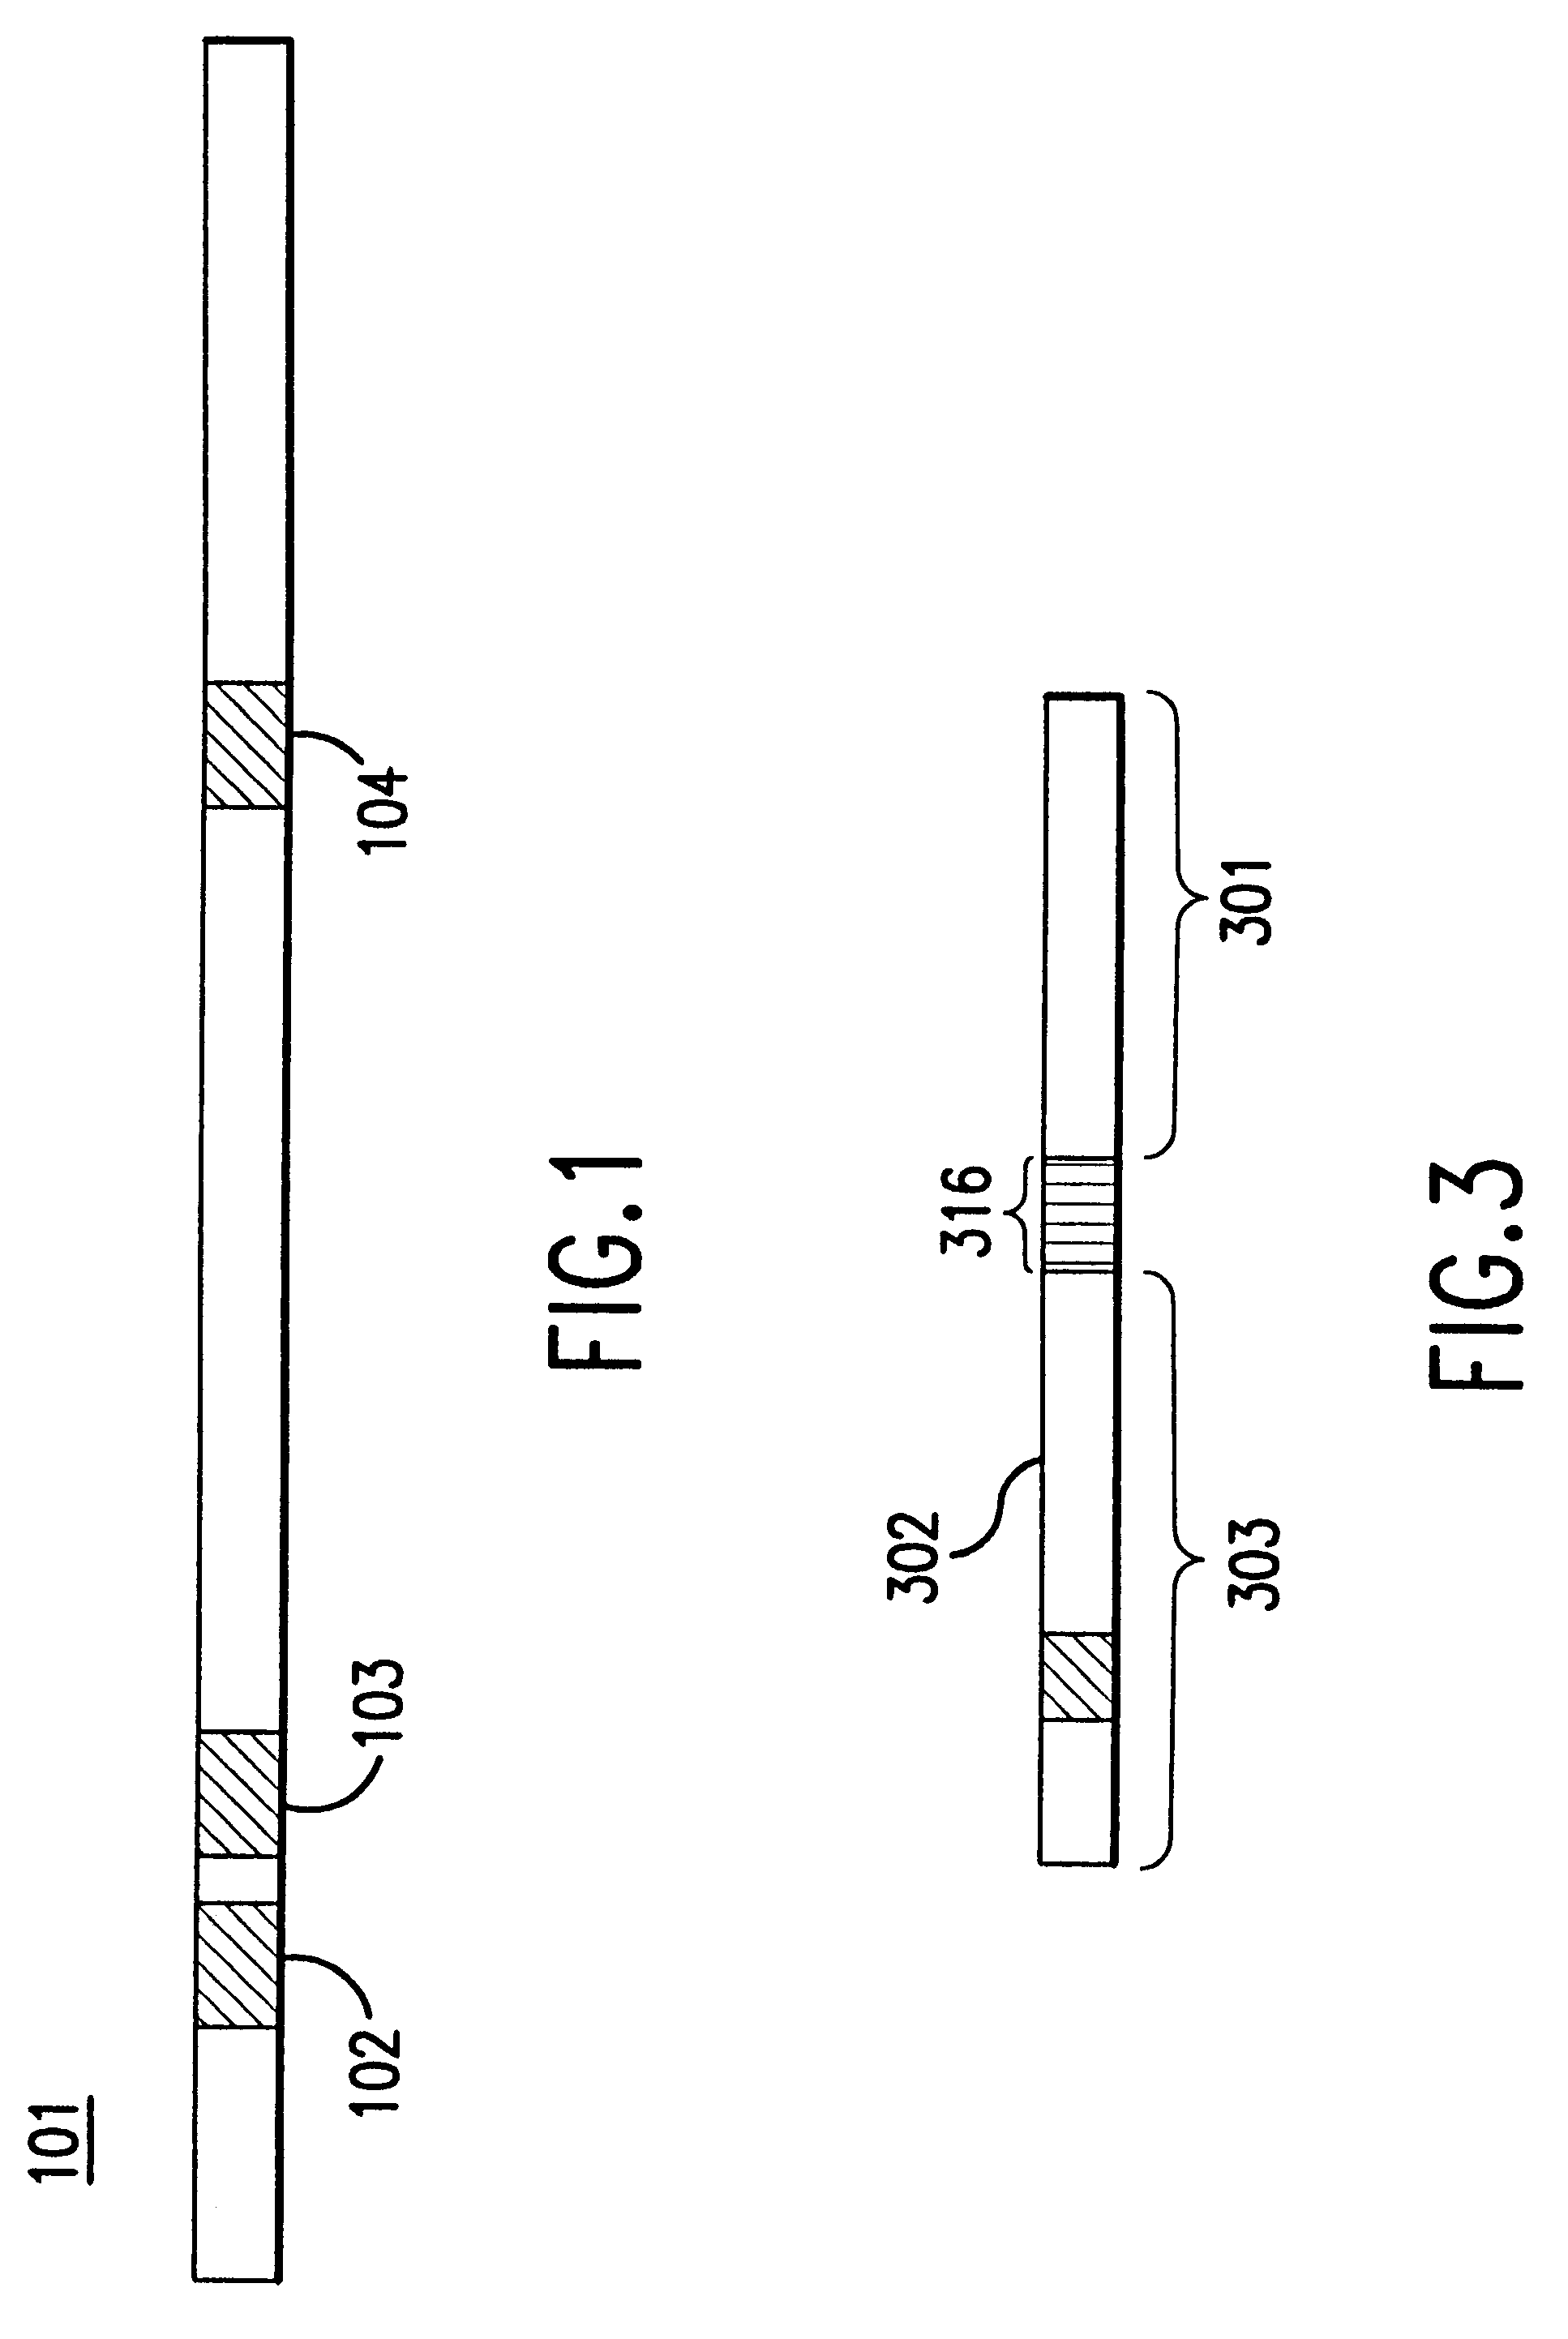 Methods and devices for measuring differential gene expression